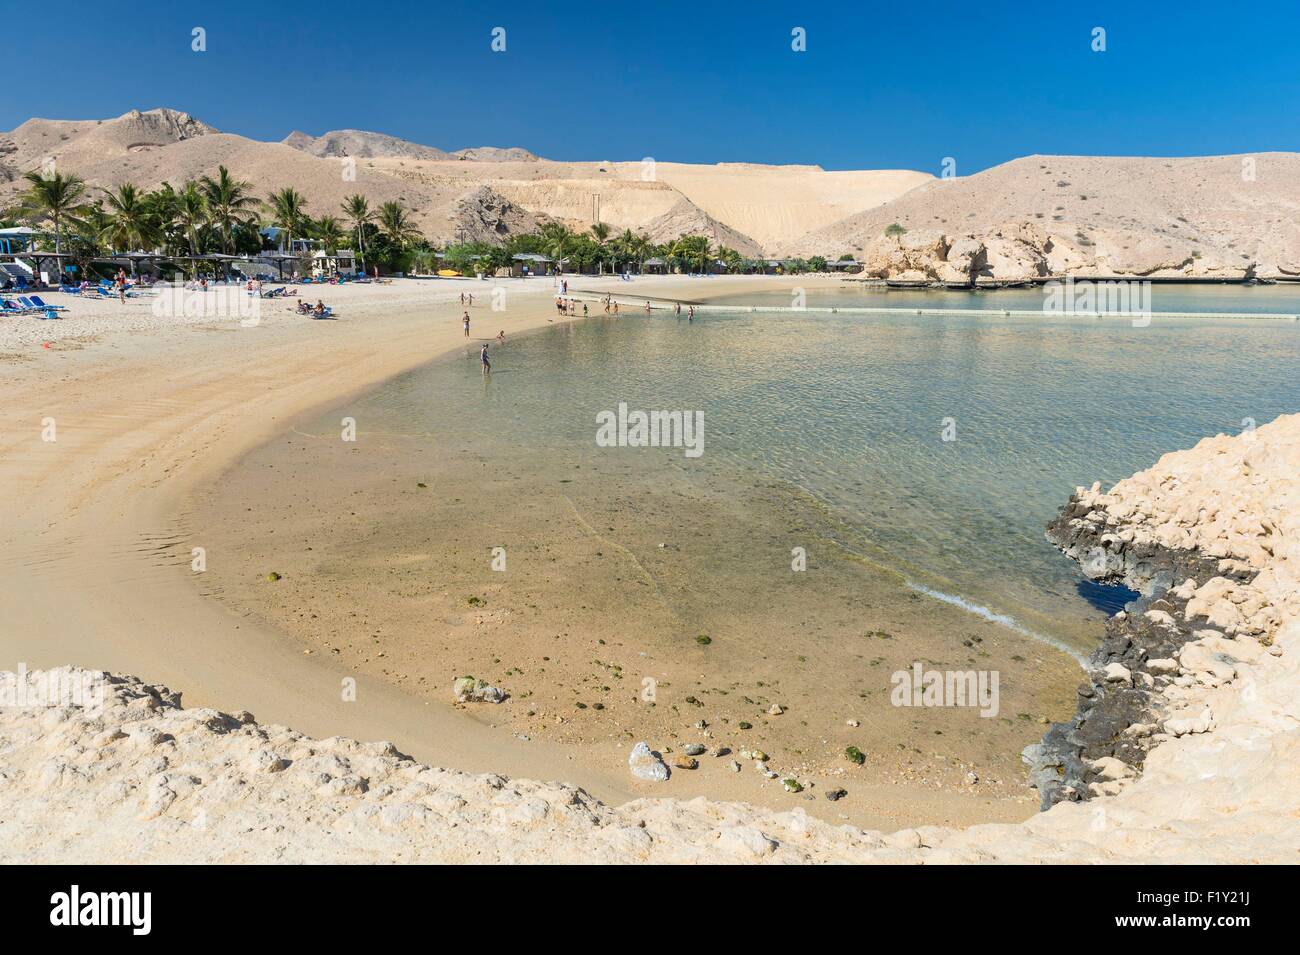 Sultanate of Oman, gouvernorate of Mascate, Bandar Jissah, the beach of the Oman Dive Centre Stock Photo